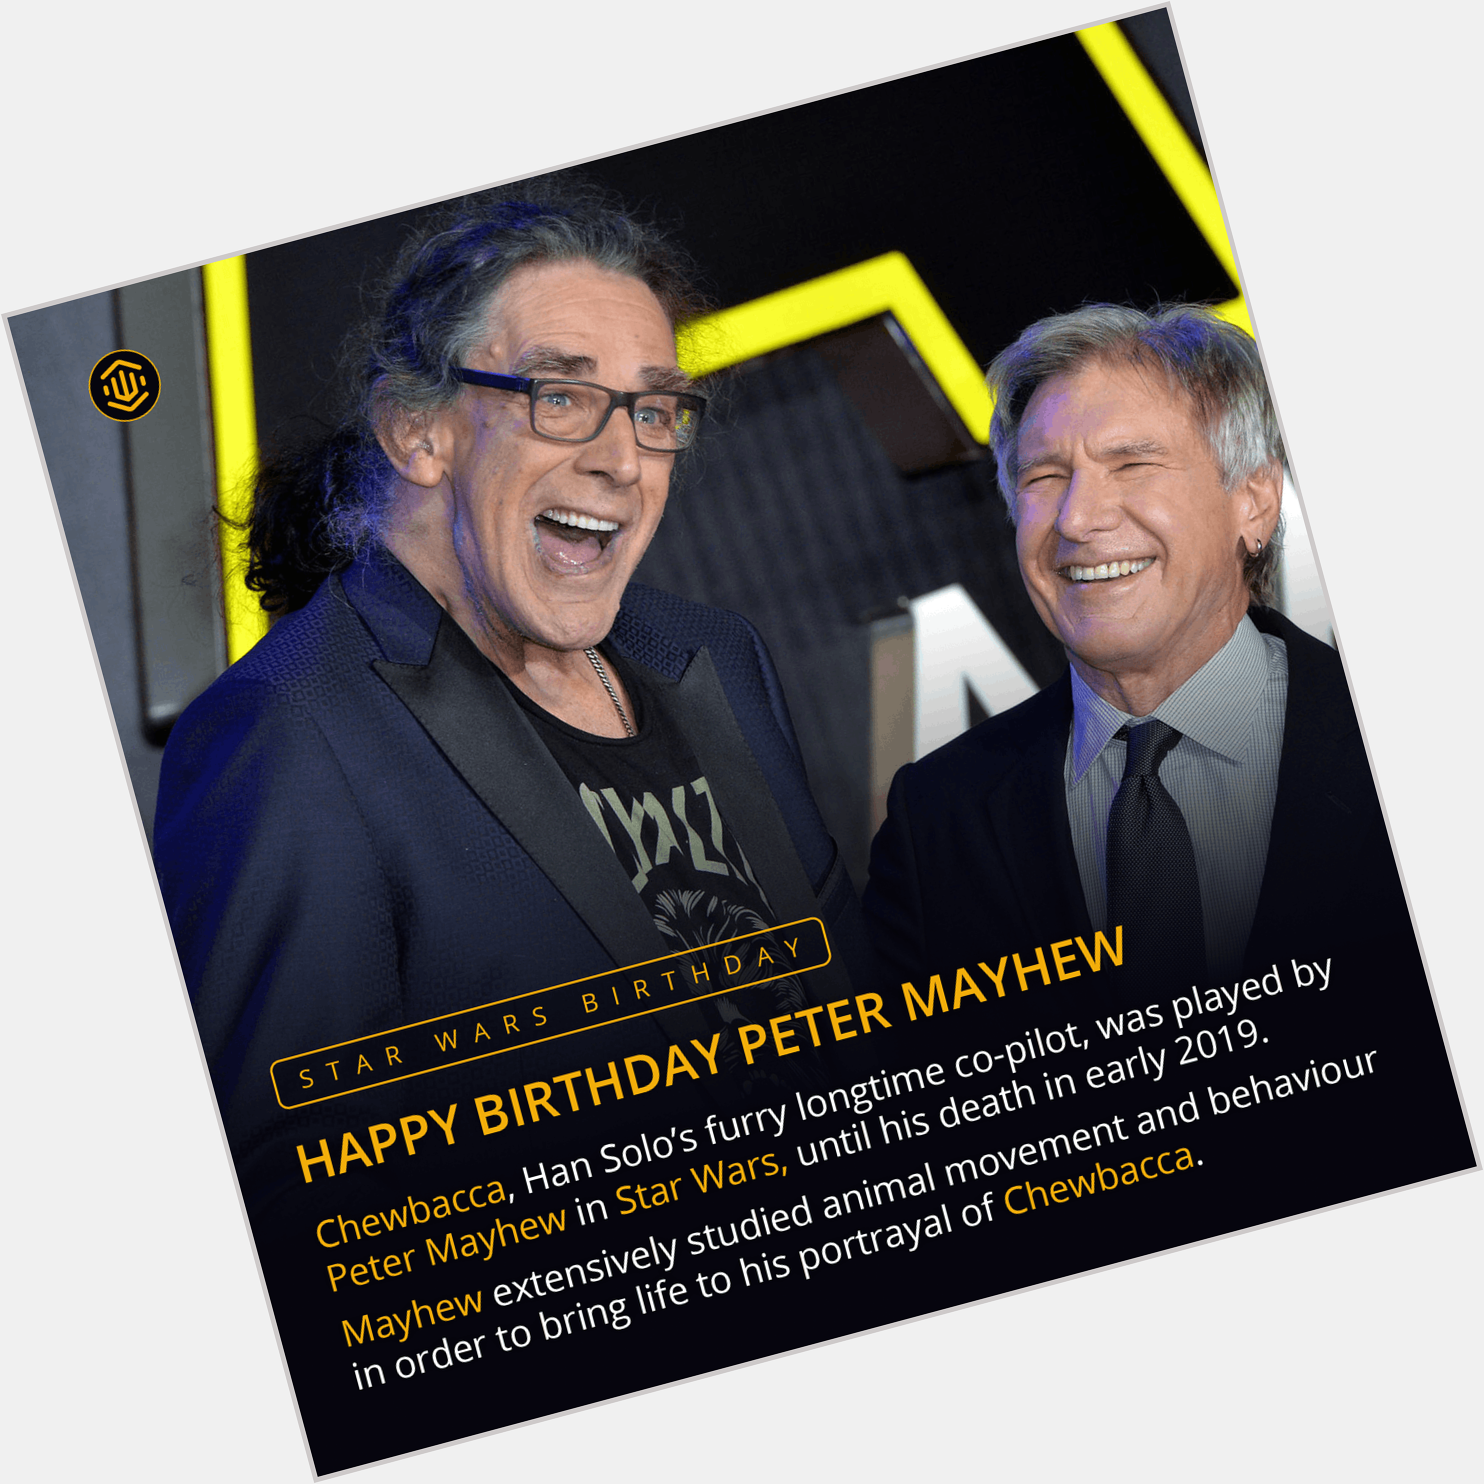 Happy Birthday to the furriest of the Hollywood greats, the late Peter Mayhew! 